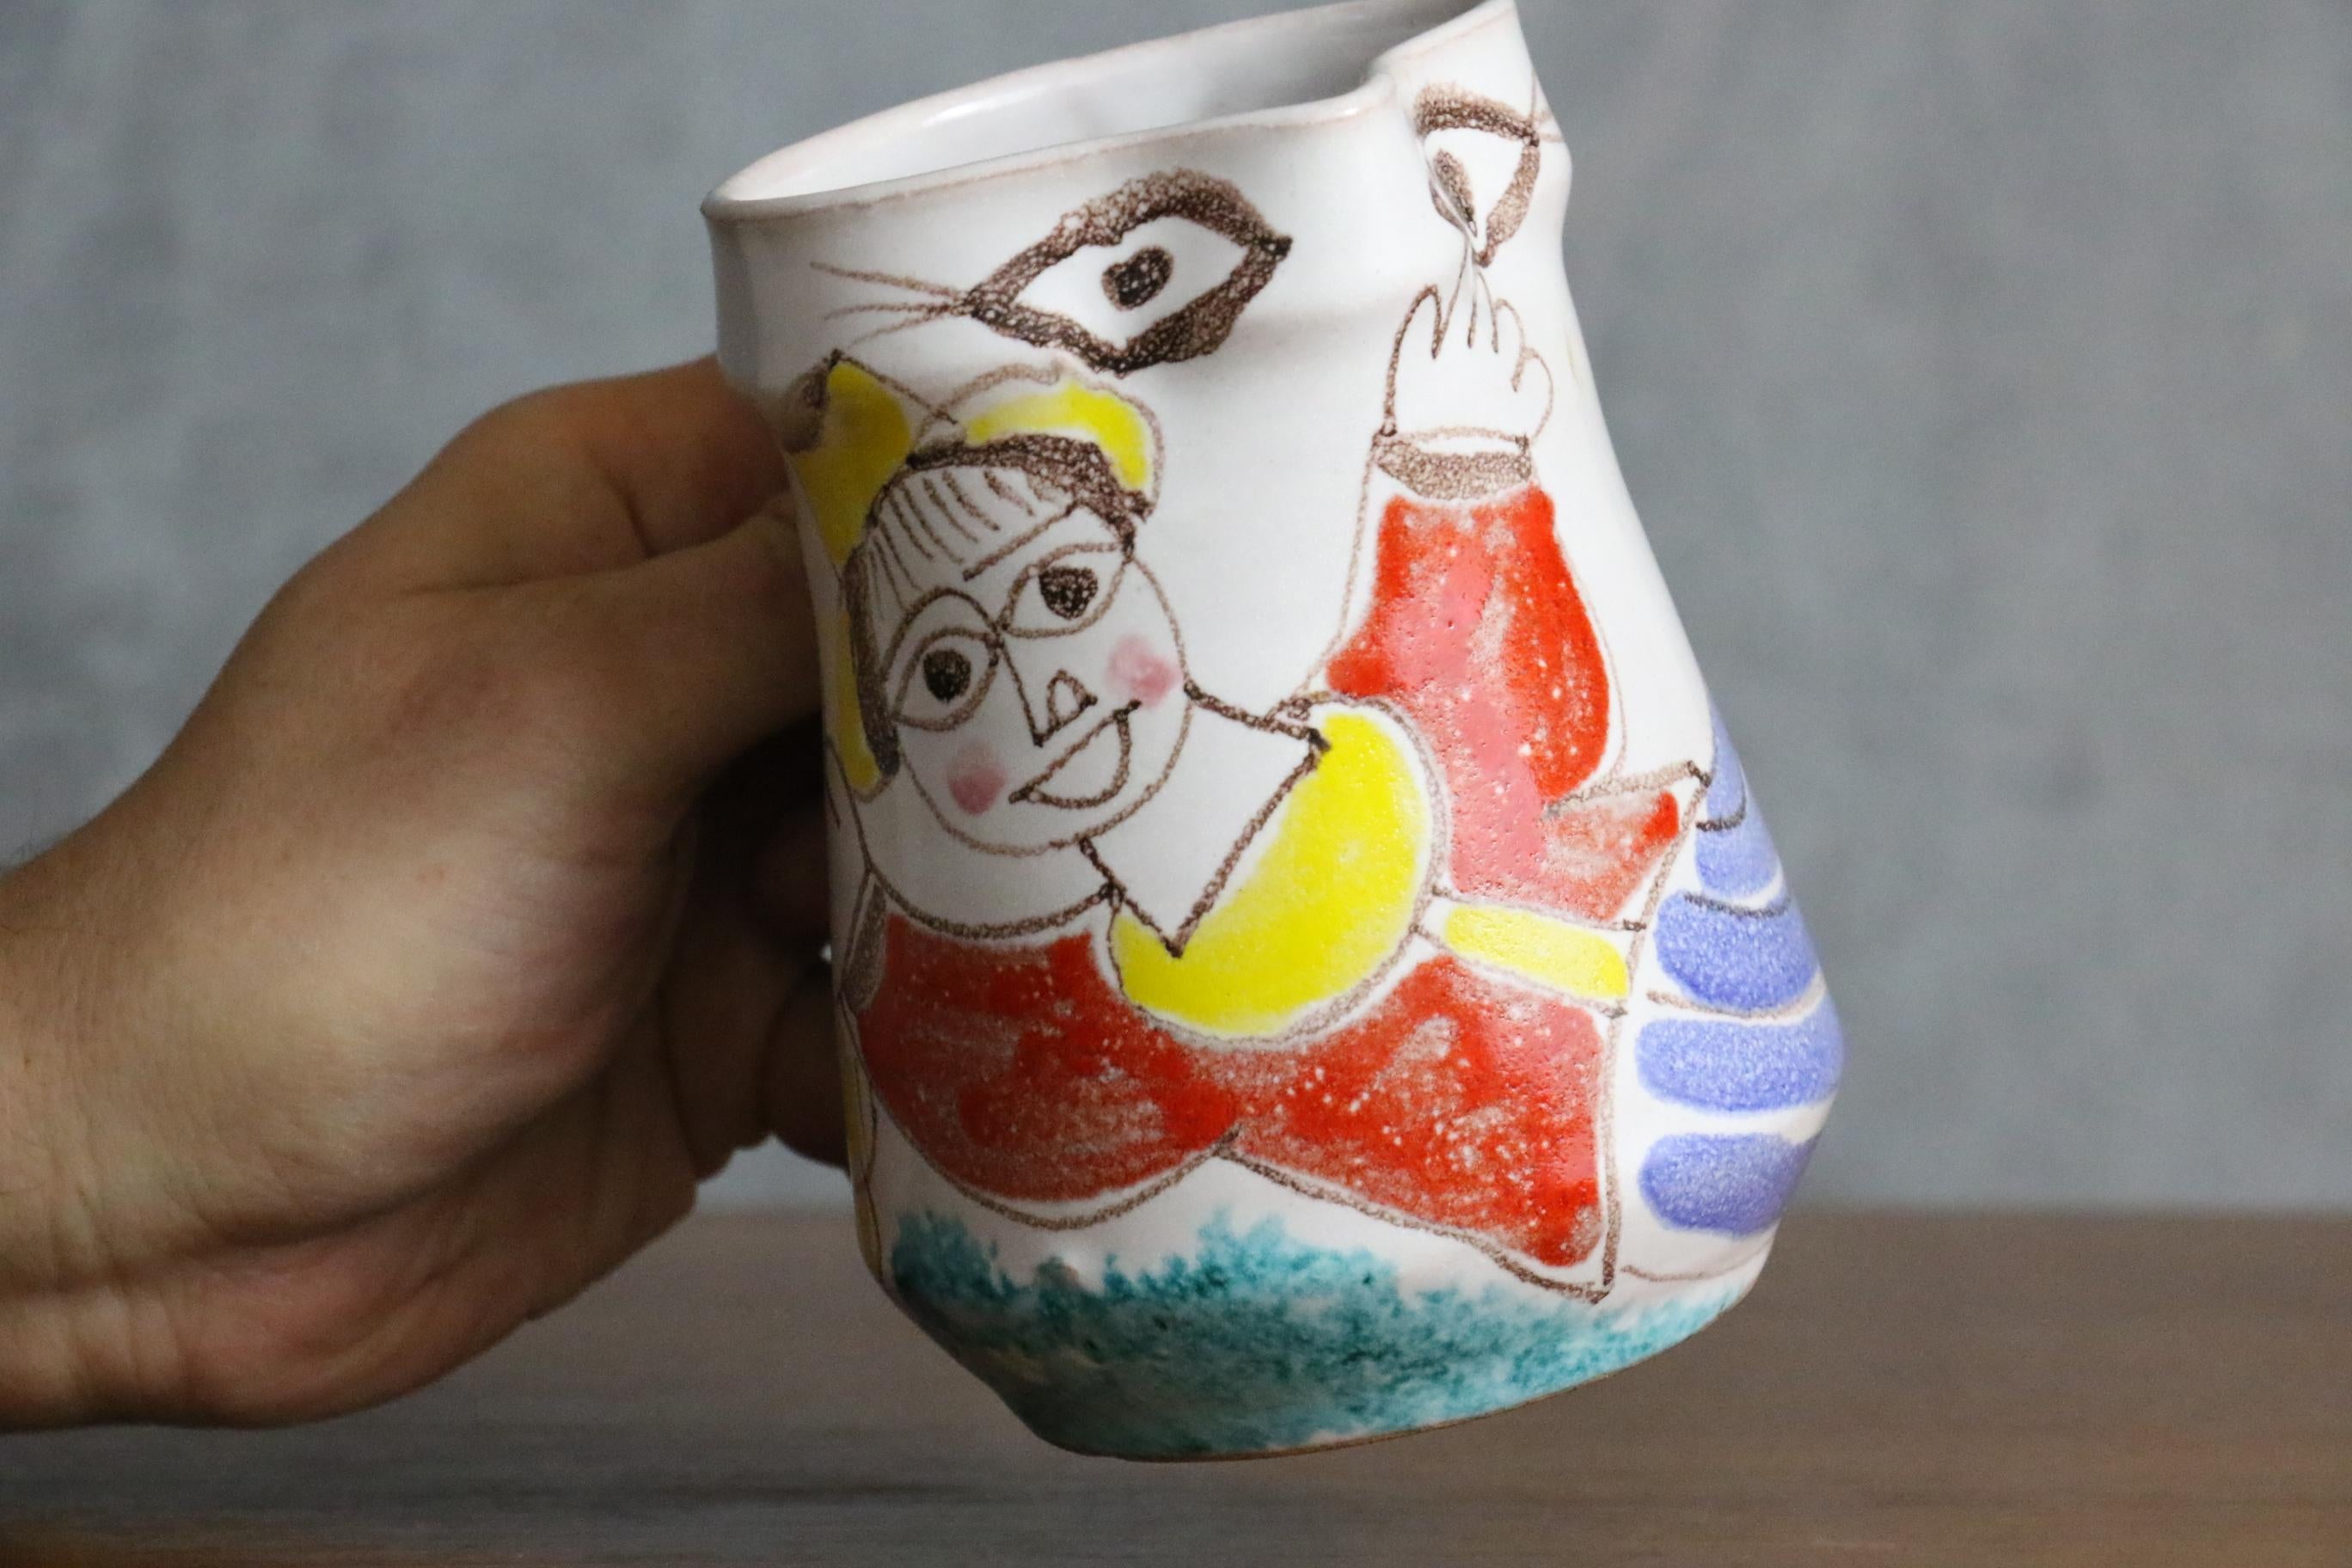 Desimone, hand painted ceramic pitcher, Italian Pottery, circa 1960 - Era Aldo Londi

Very nice pitcher representing a laughting man with an traditional italian wine botle in is hand. 

This is a very colorful piece as usual in Giovanni DeSimone's